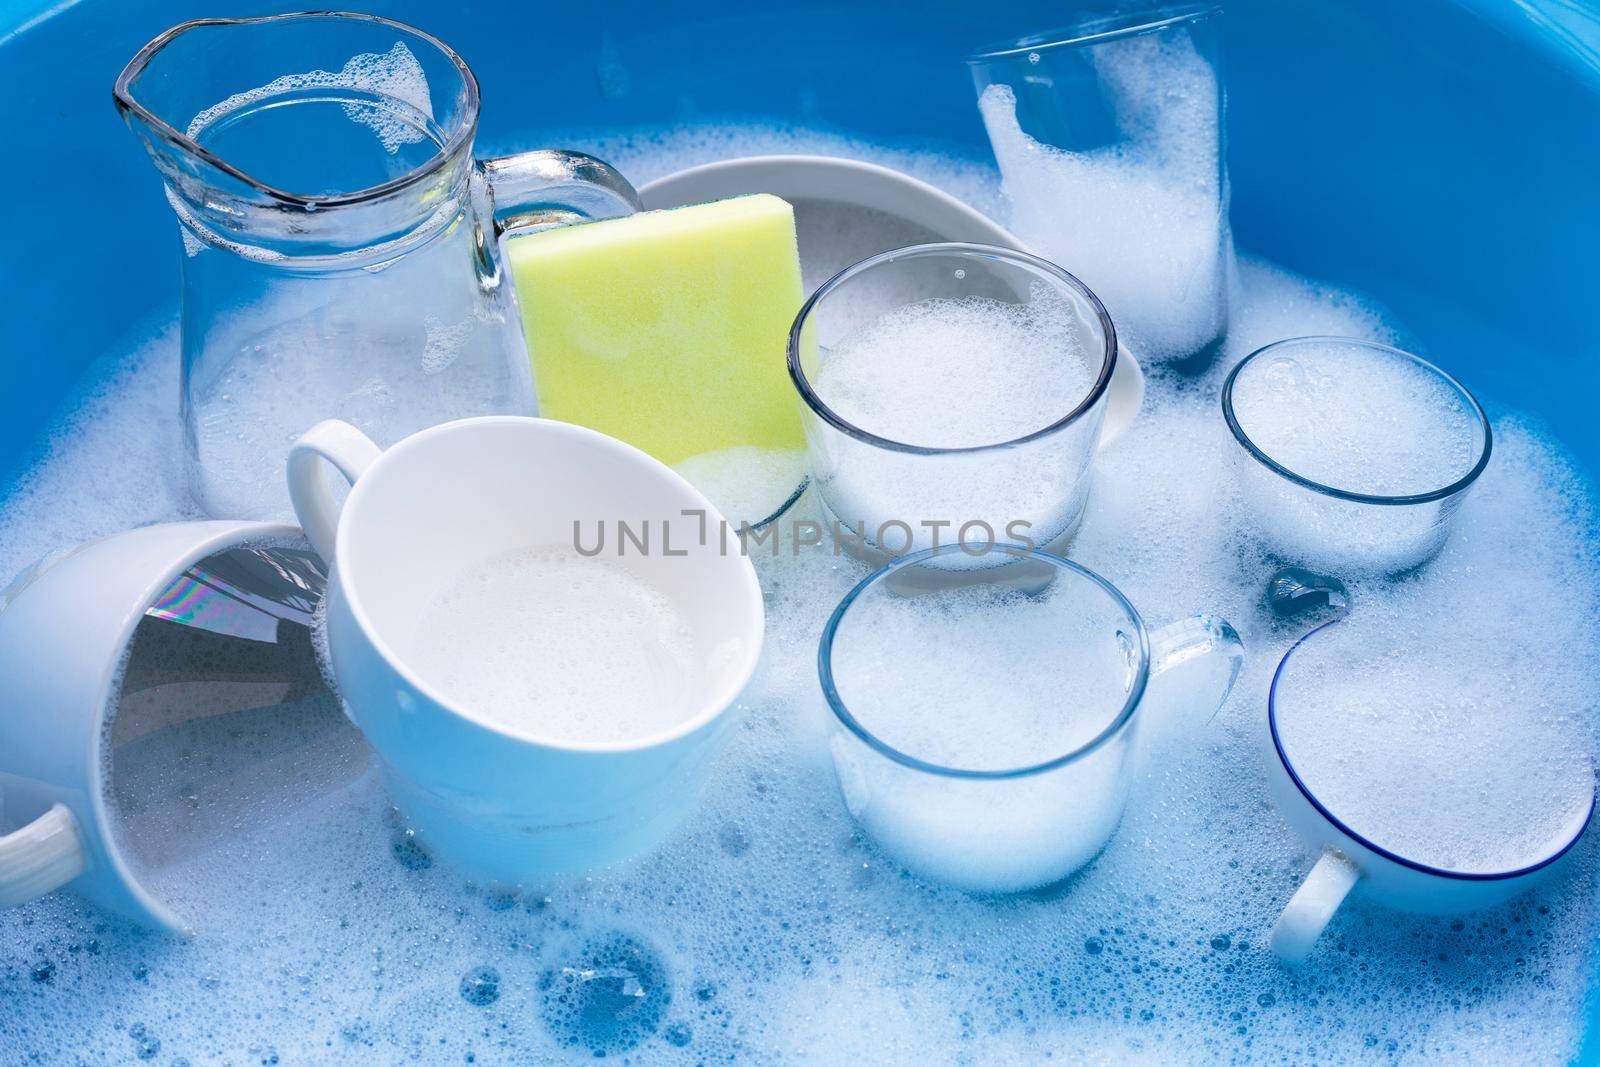 Washing used drinking glasses and cups with yellow sponge by Bowonpat